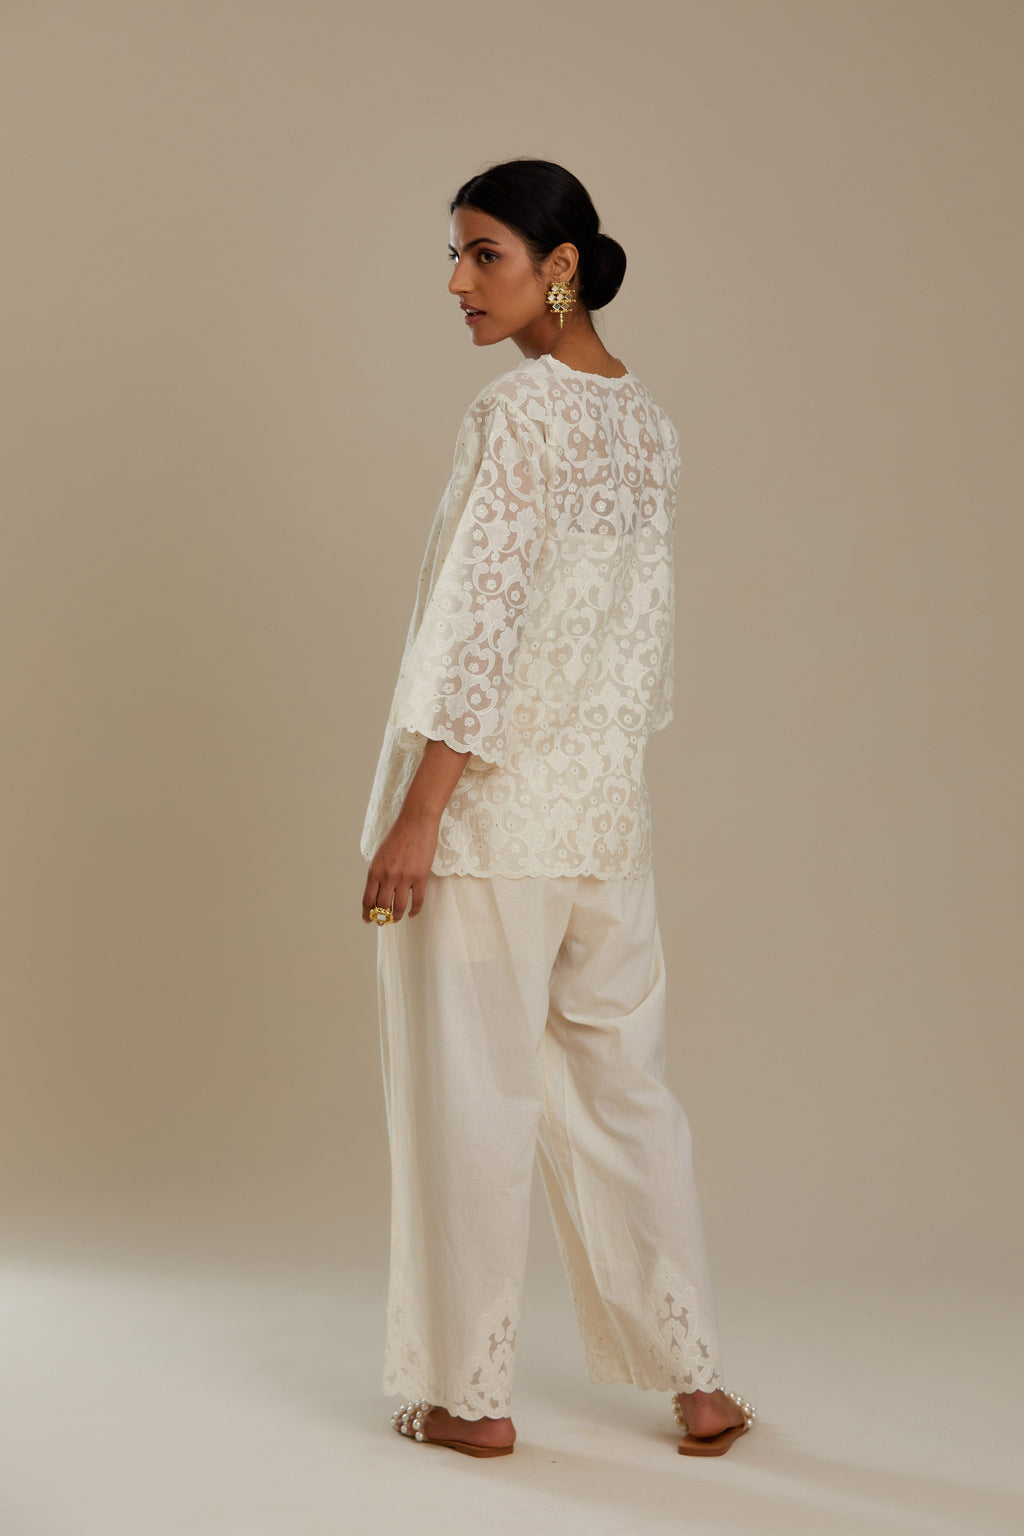 Off white cotton chanderi short top with all-over appliqué, highlighted with sequin, paired with off white cotton straight pants with appliqué detail at hem, highlighted with sequins.